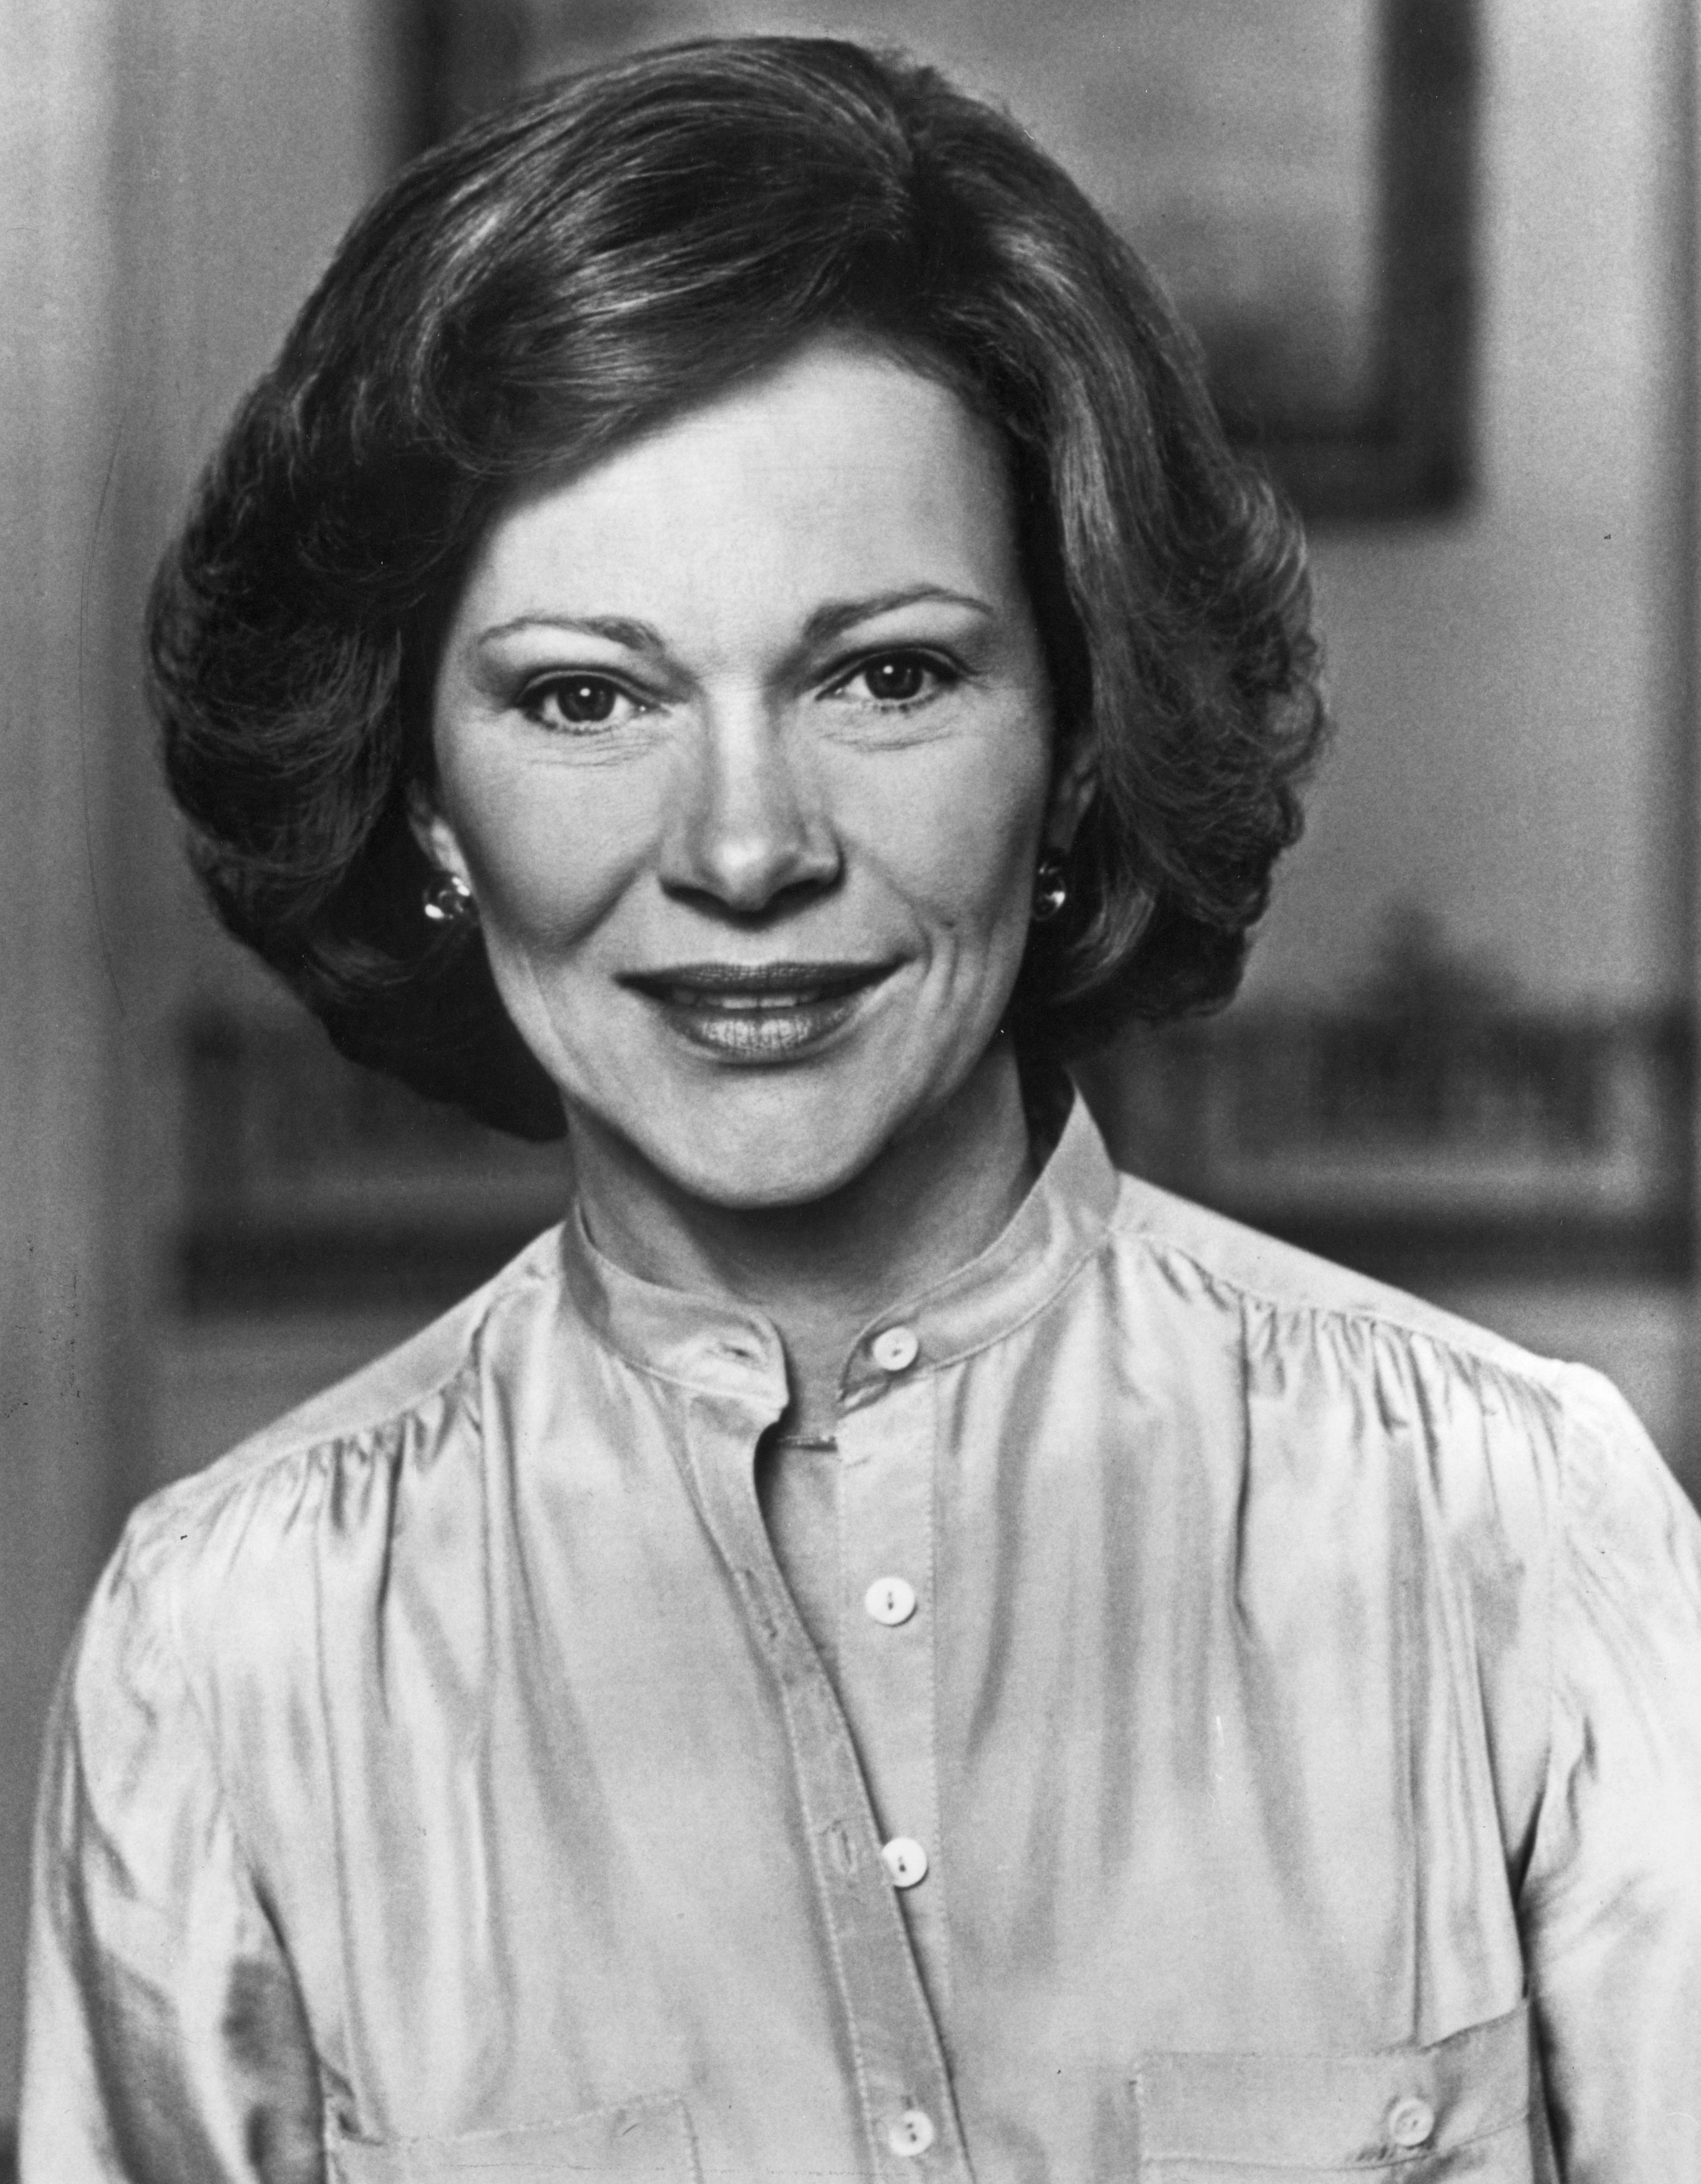 An official photograph of American First Lady, Rosalynn Carter, dated August 1979 | Source: Getty Images